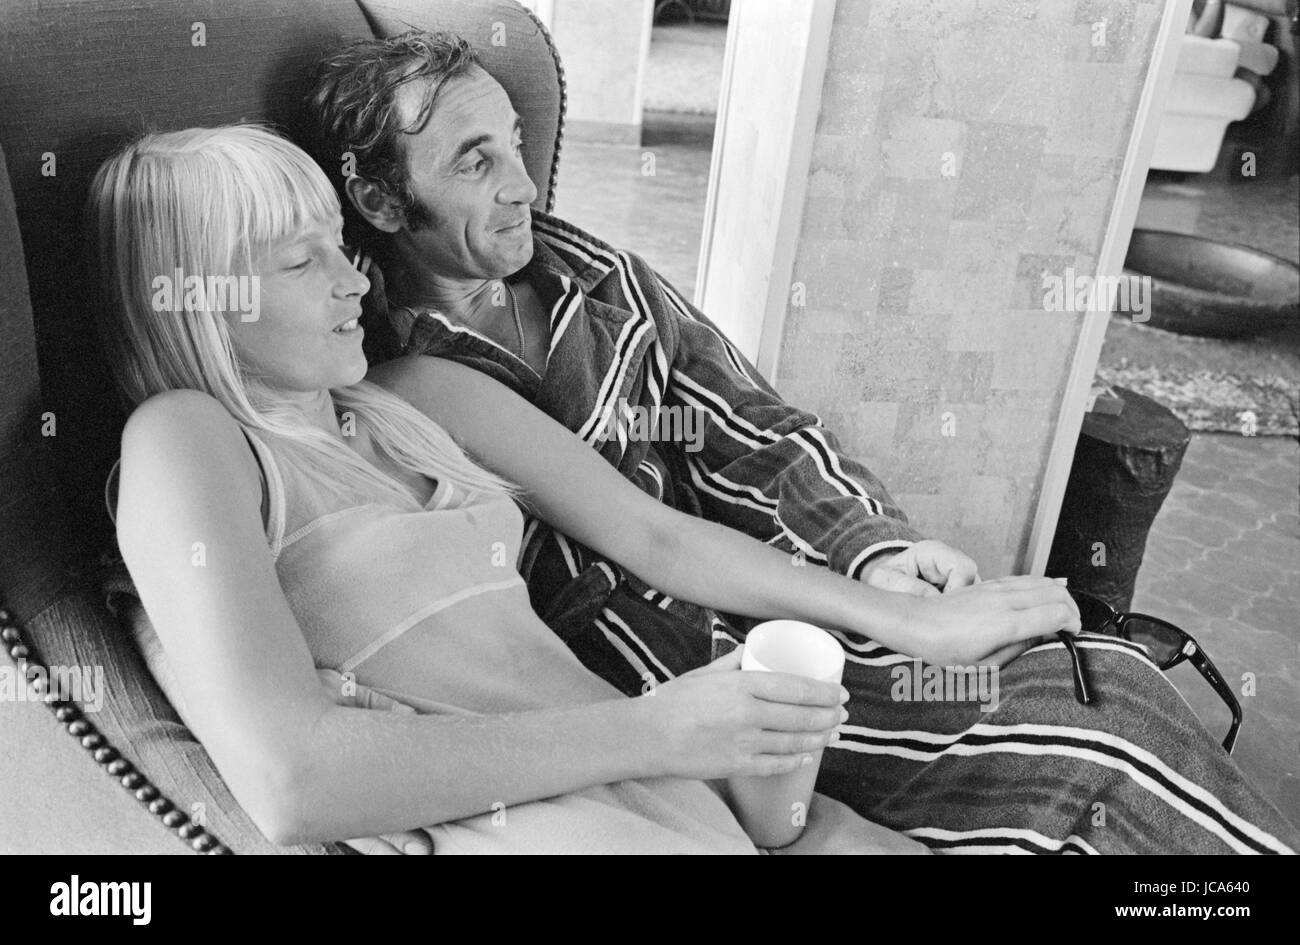 Charles Aznavour with wife Ulla Thorsell enjoying their holidays in their home in Mandelieu-La-Napoule (Alpes-Maritimes, France).  Summer 1970 Photo Michael Holtz Stock Photo